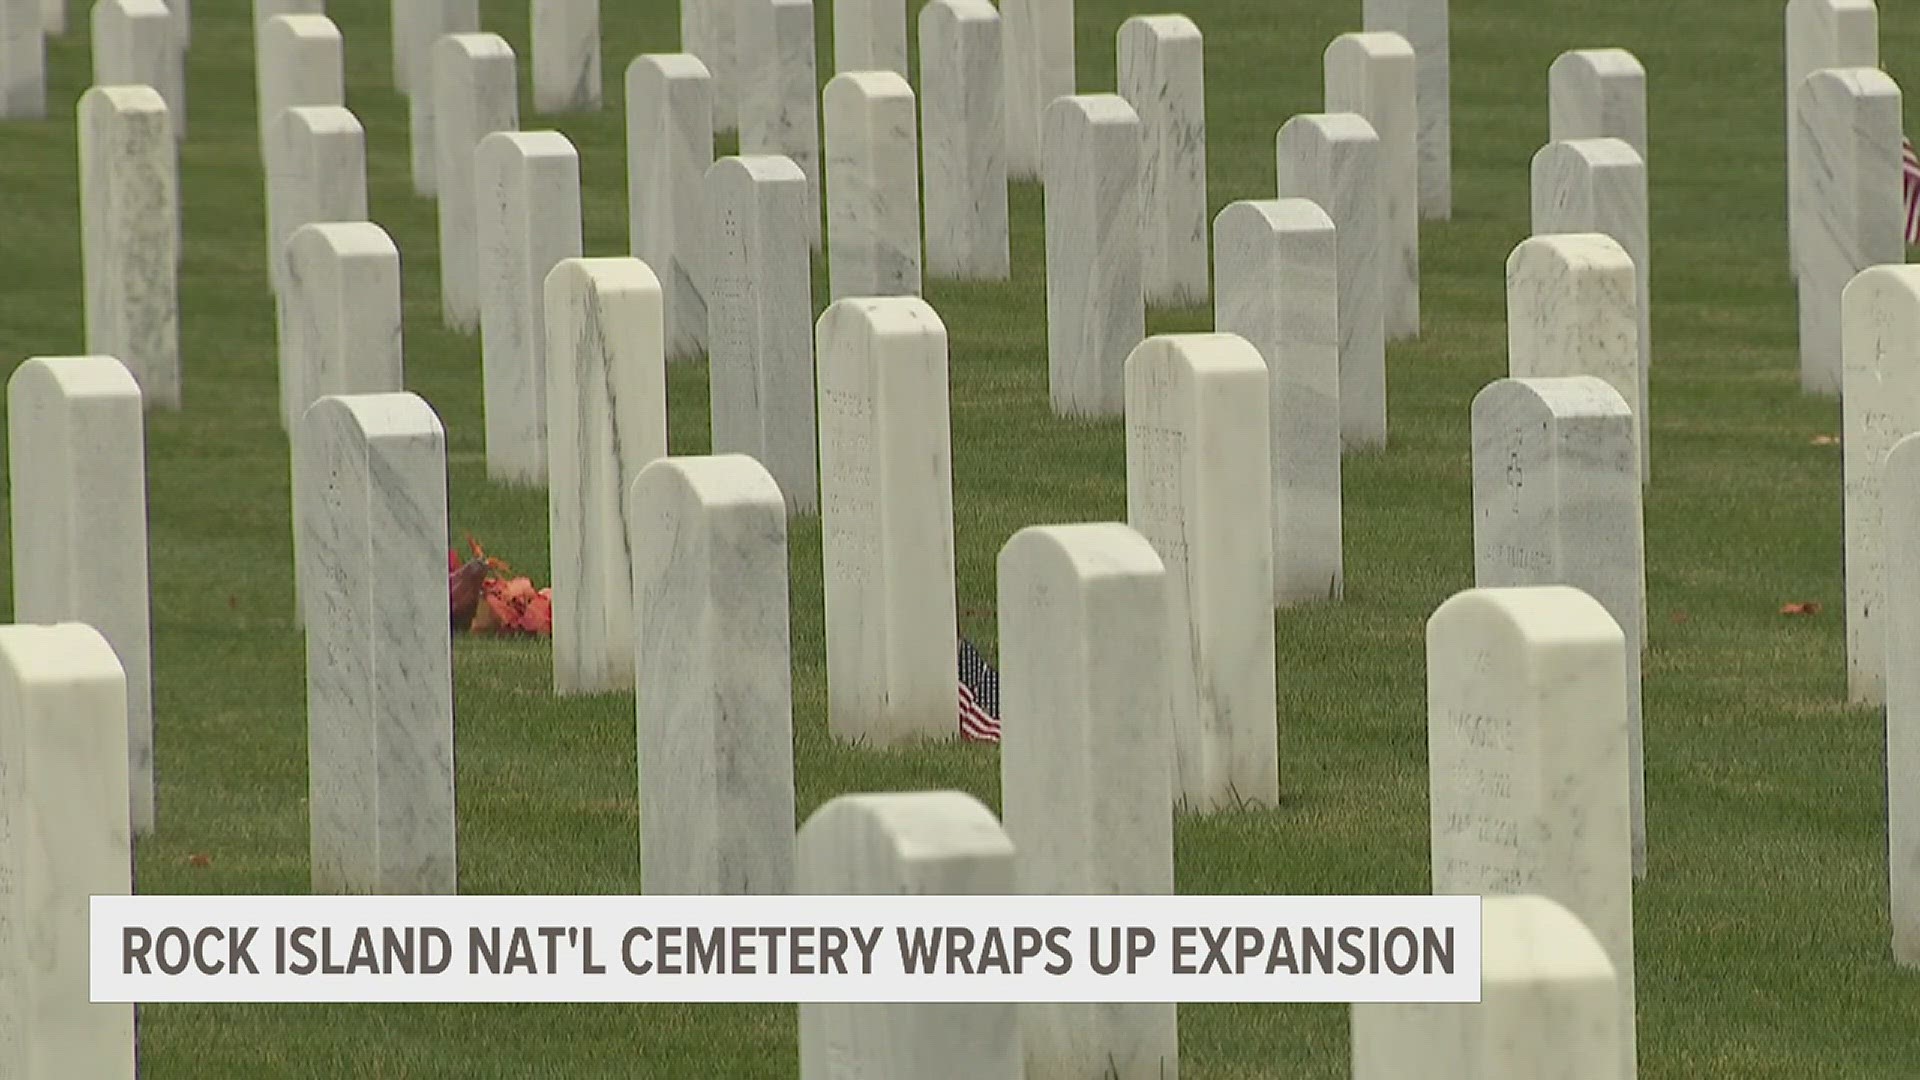 The director said the expansion project will give the national cemetery another 15 years of burial space.